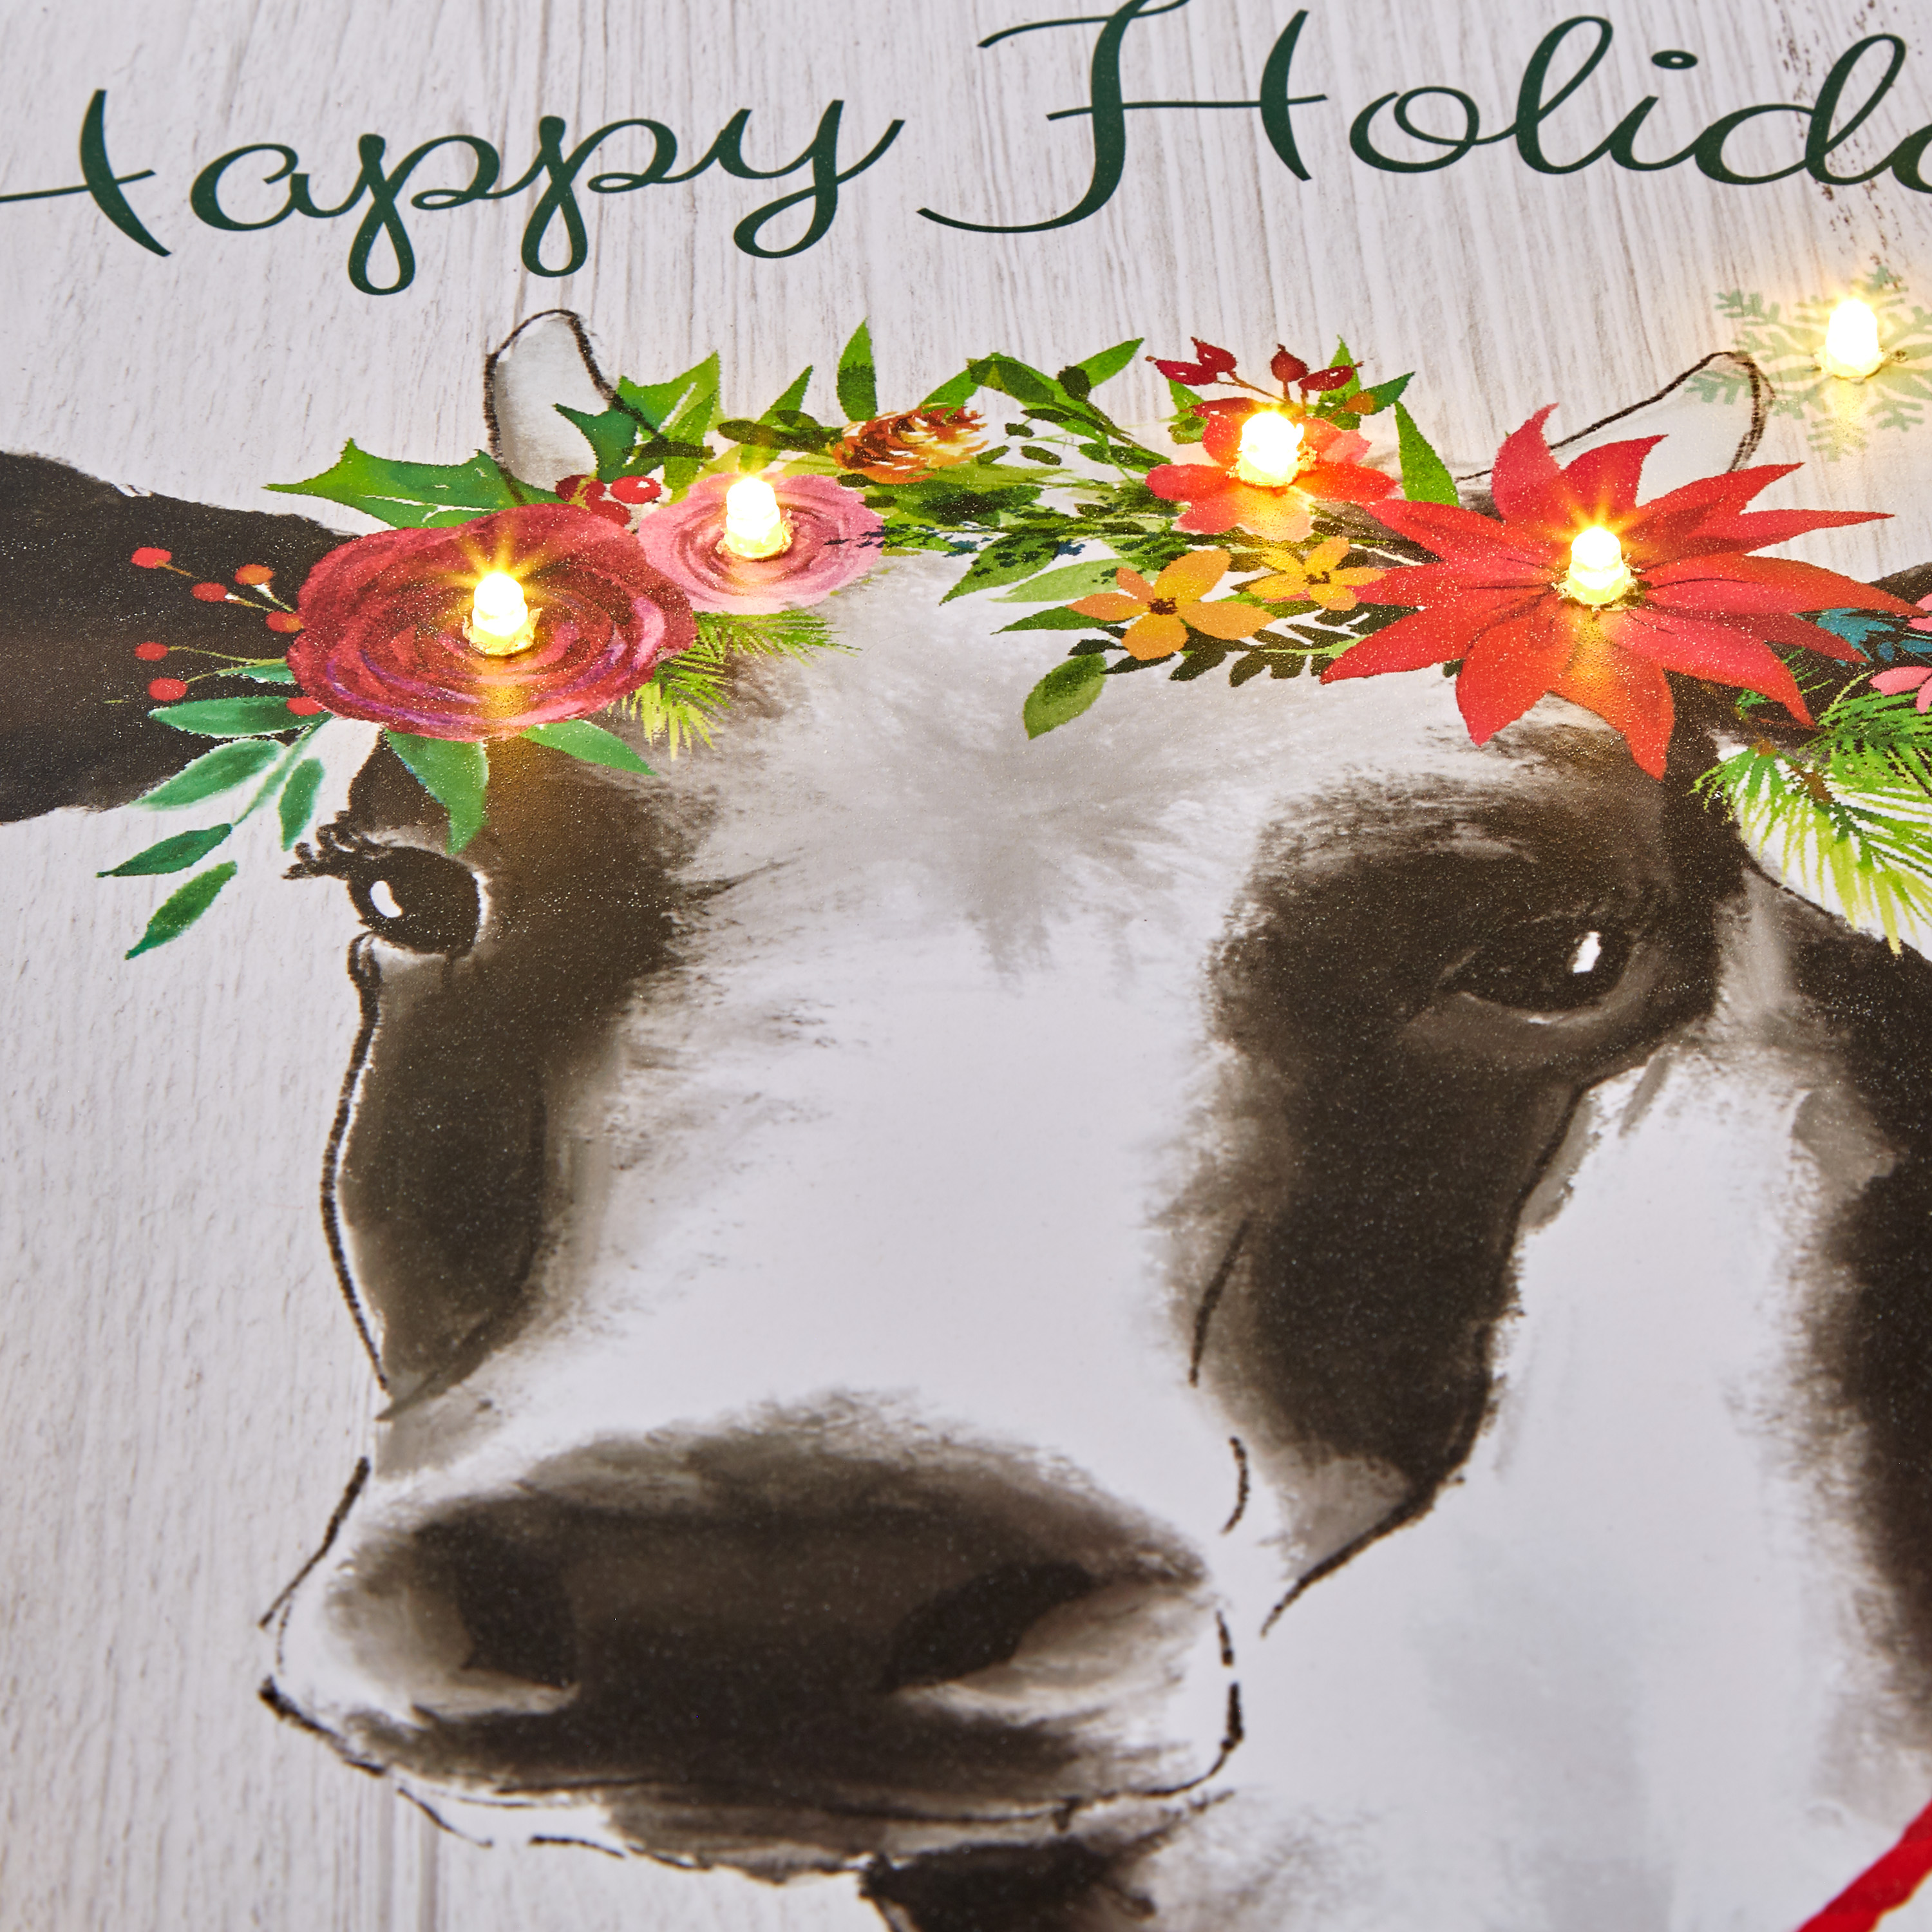 The Pioneer Woman LED Hanging Sign, Happy Holidays - image 3 of 5